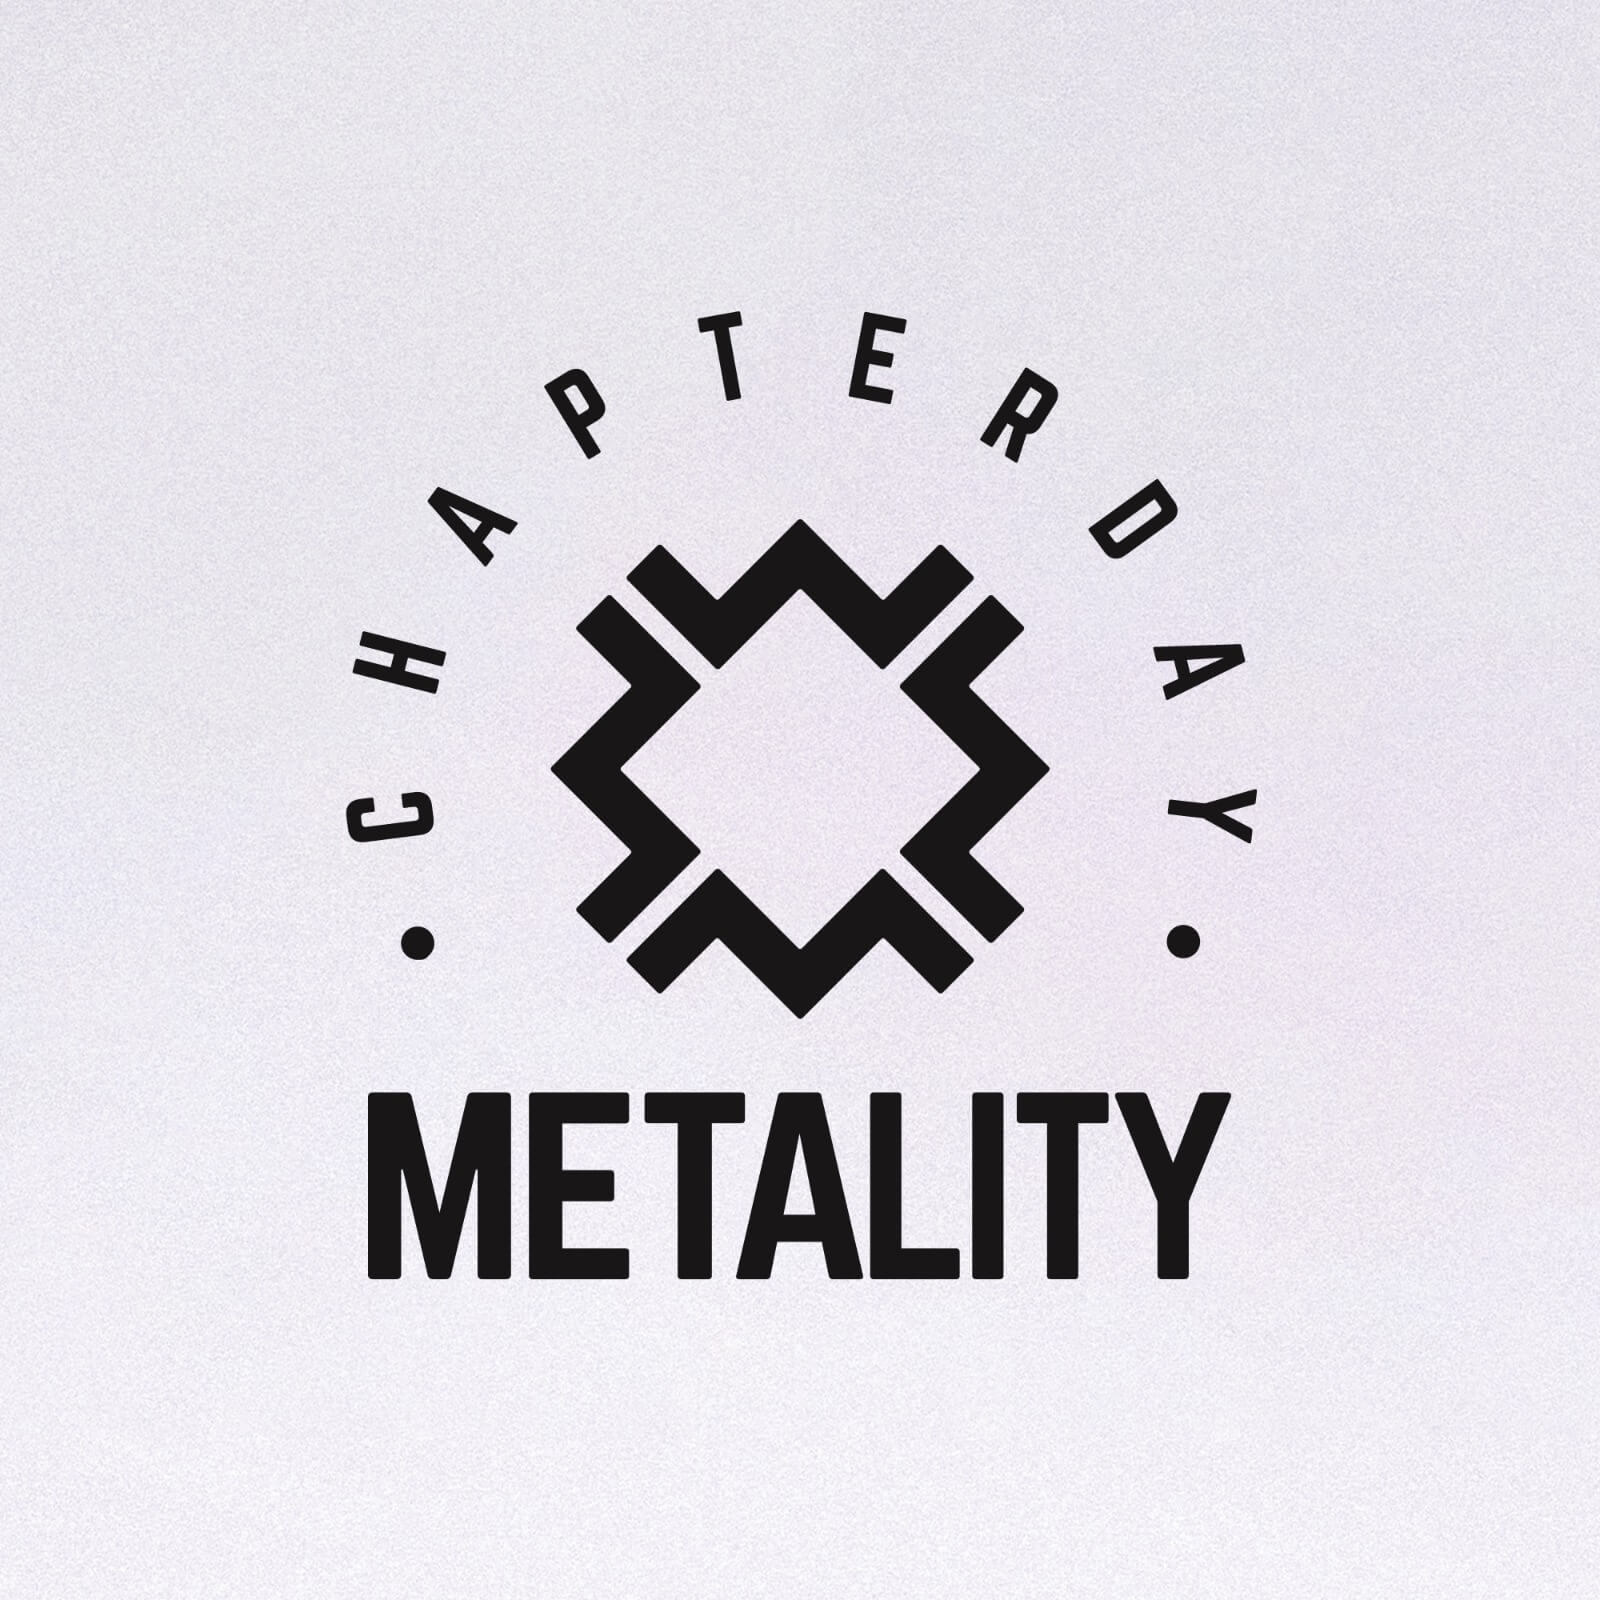 the Metality Chapterday (August 21st)